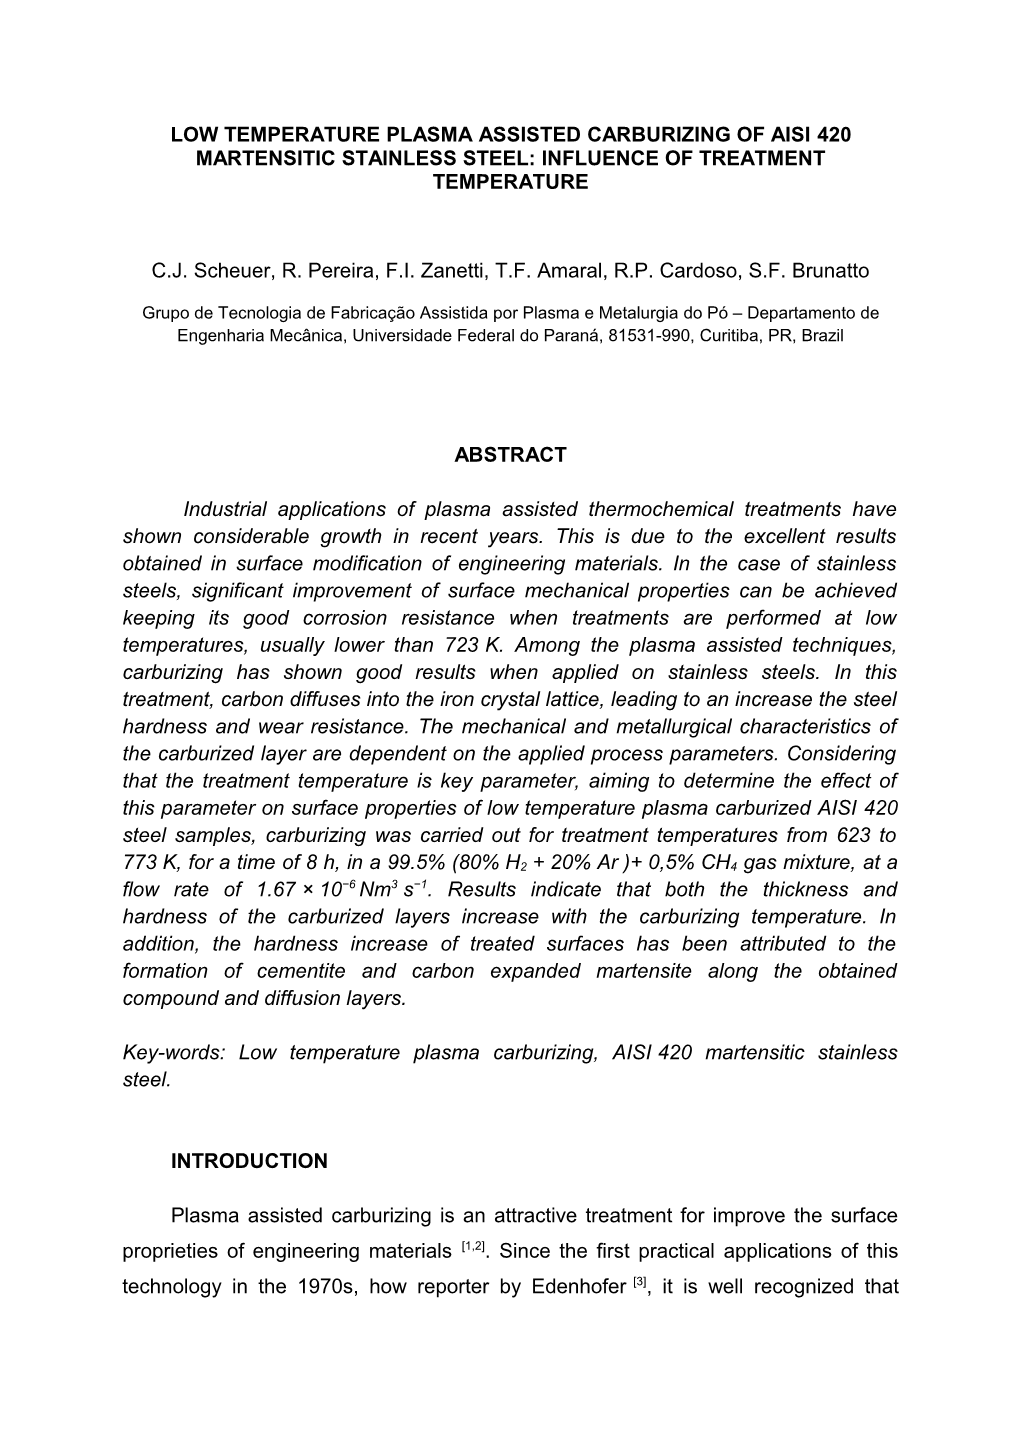 Low Temperature Plasma Assisted Carburizing of Aisi420 Martensitic Stainless Steel: Influence